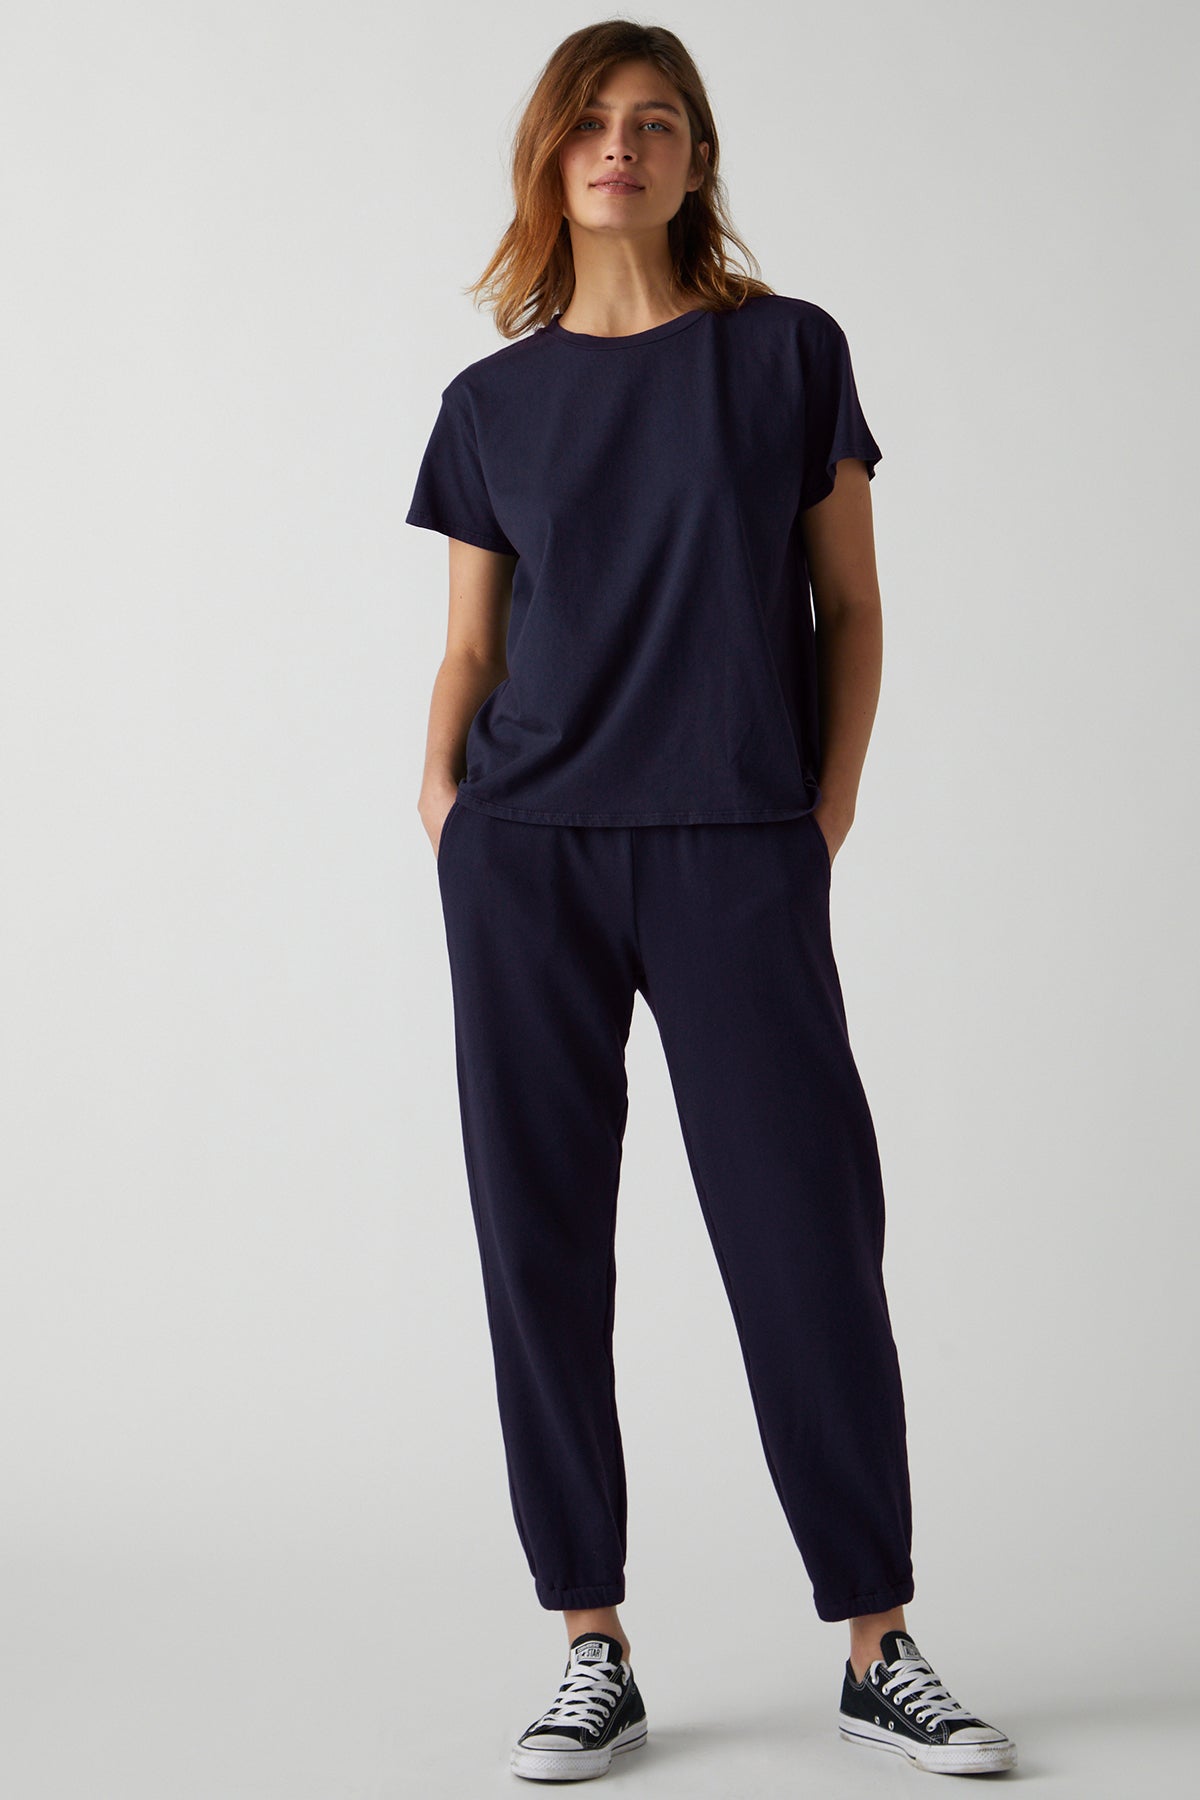 Topanga Tee in navy with Pismo Sweatpant full length front-25484453609665